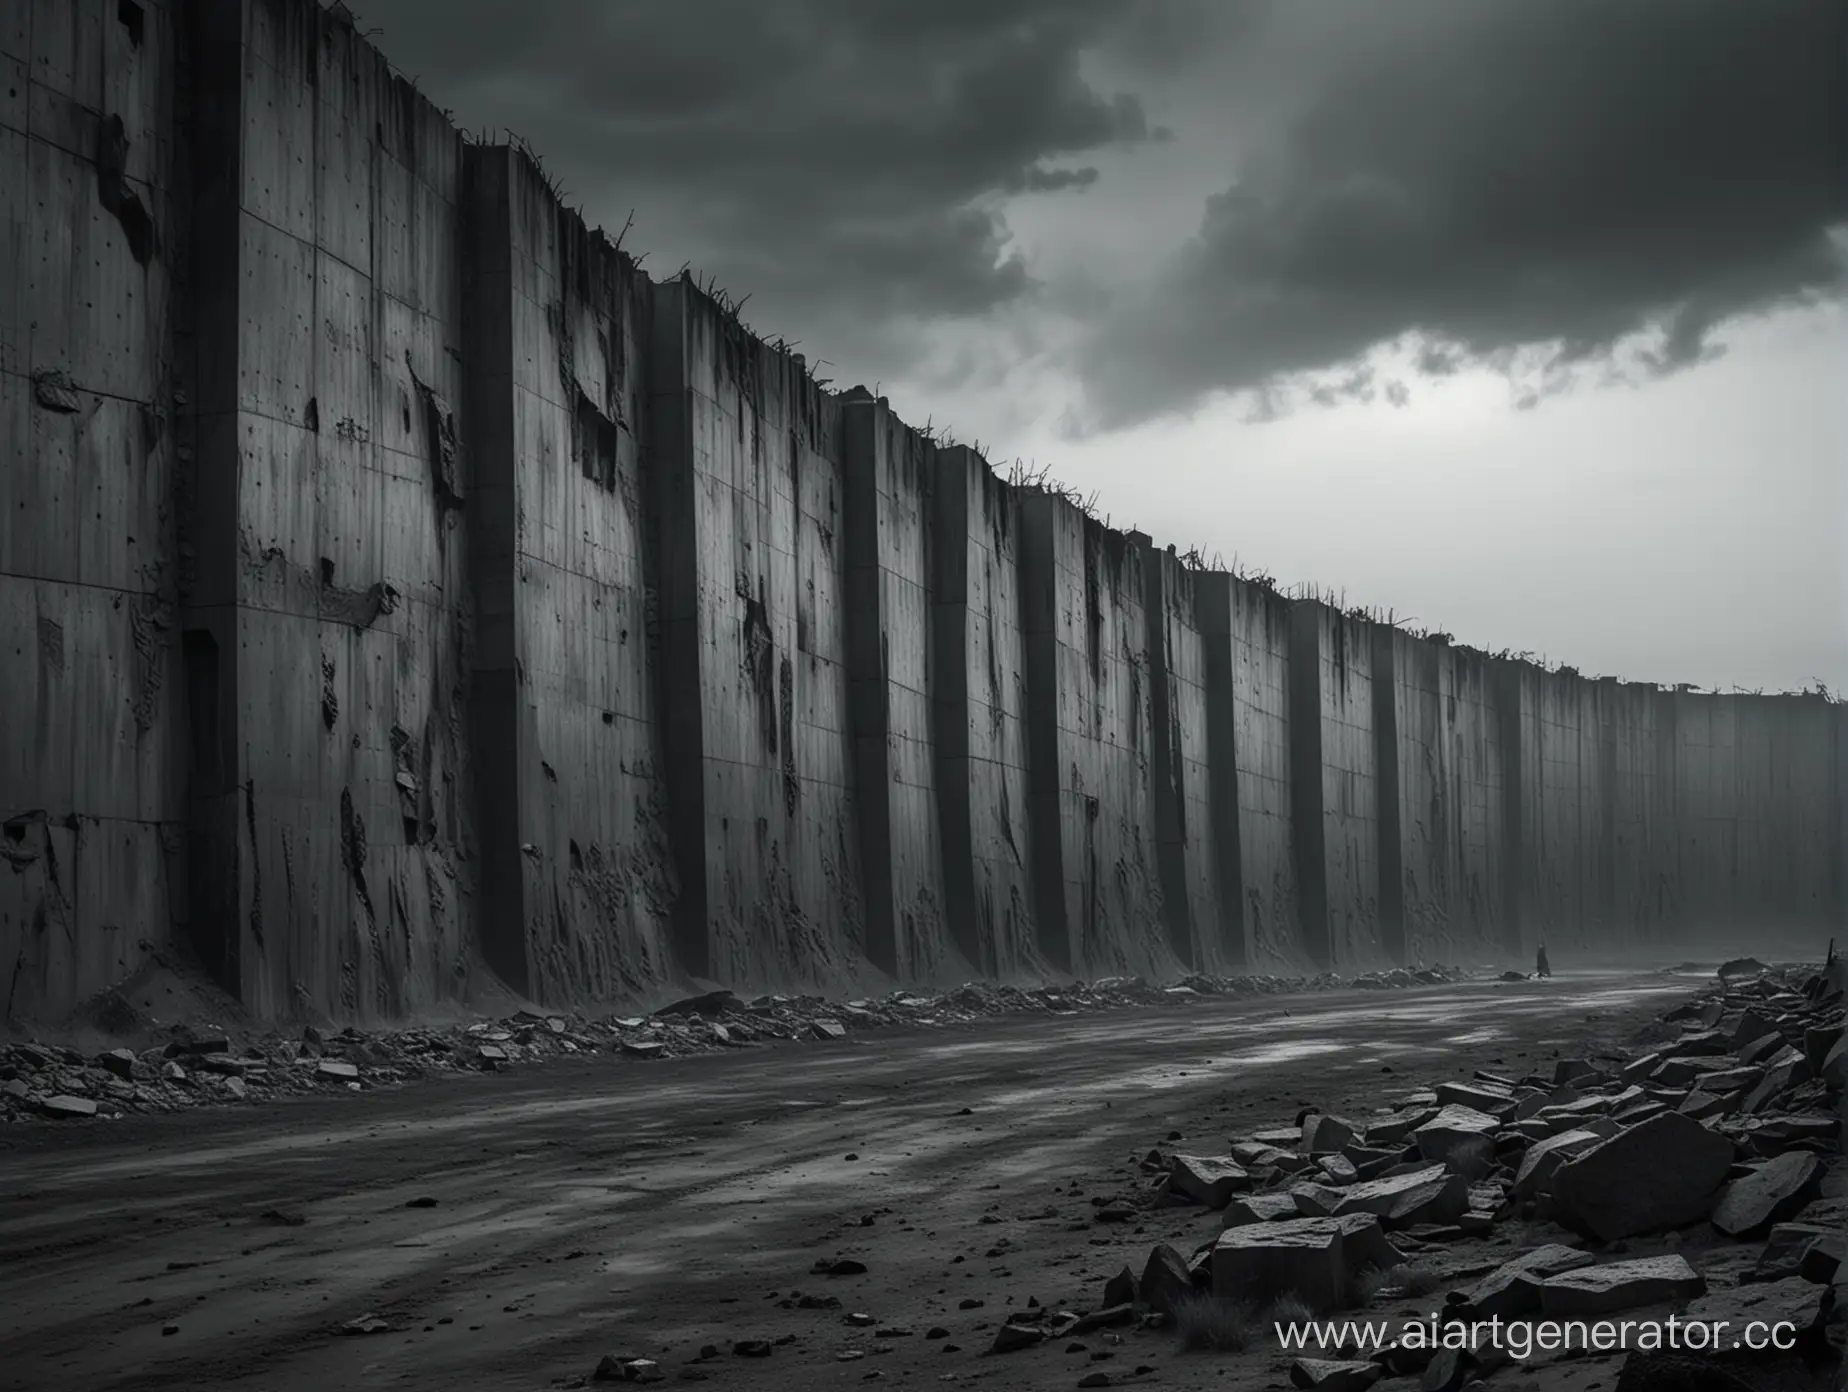 Massive-PostApocalyptic-Wall-Towering-Over-Desolate-Gray-Planet